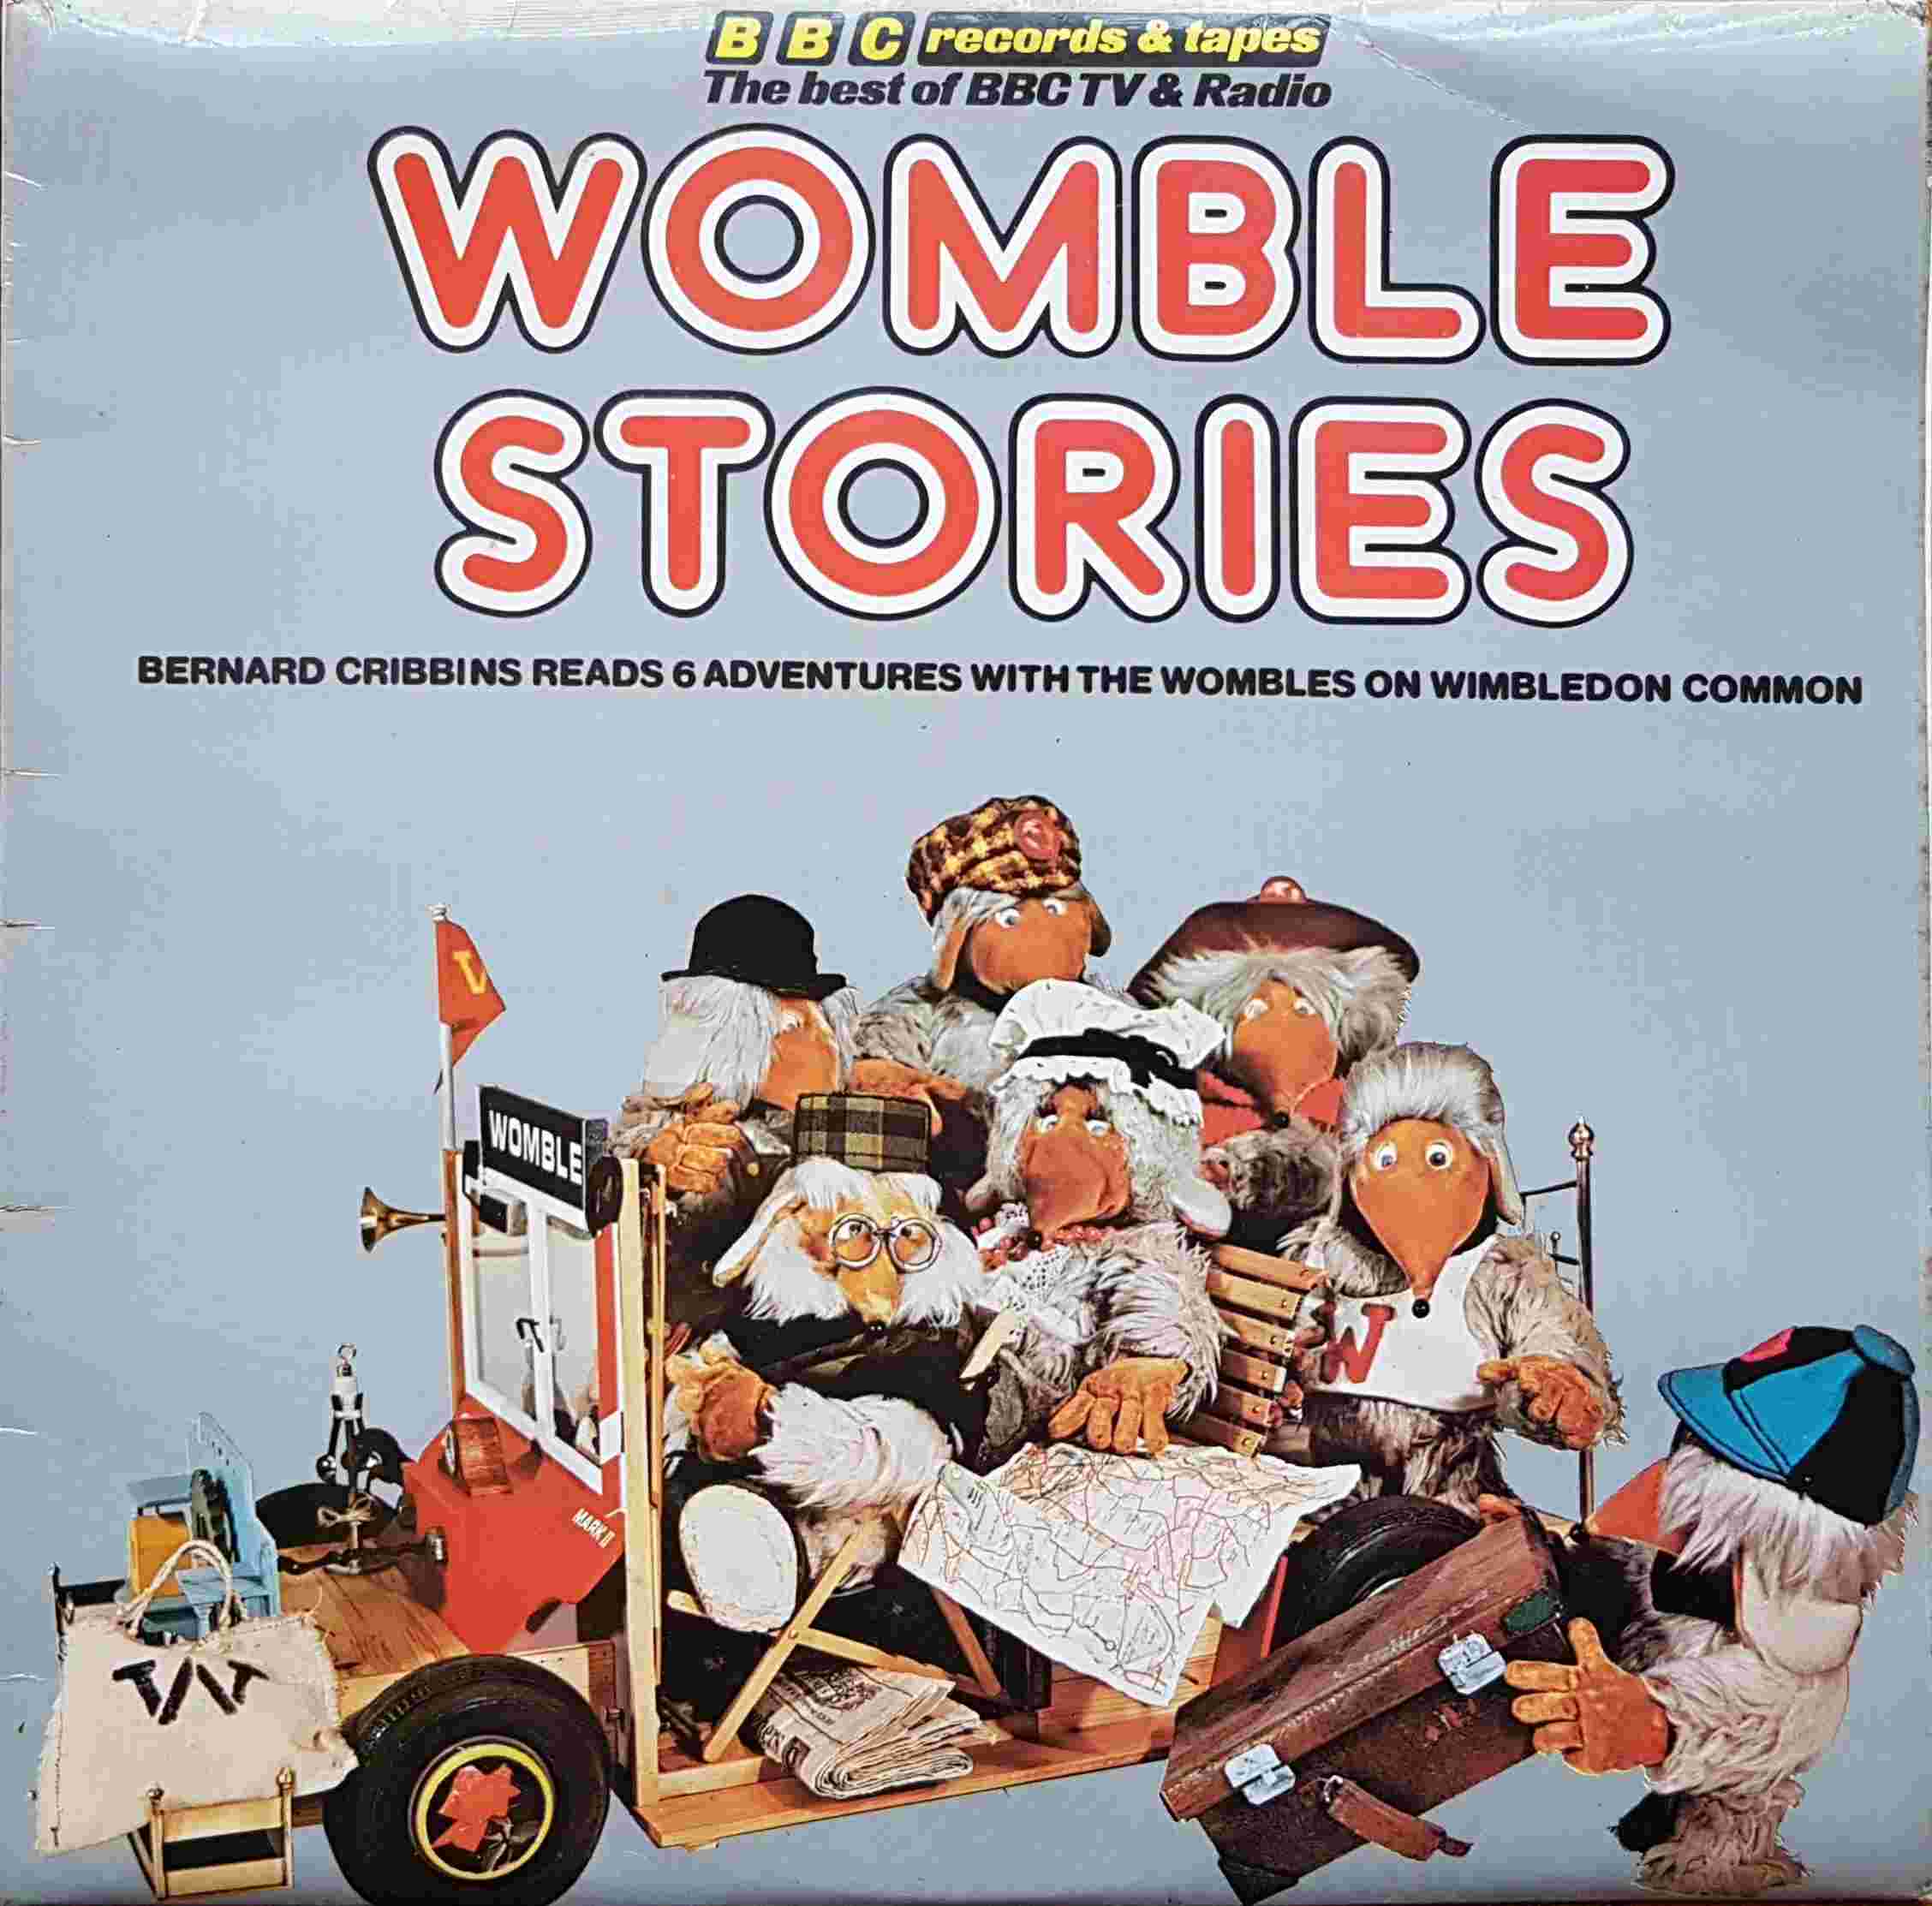 Picture of REC 253 Womble Stories by artist Bernard Cribbins from the BBC albums - Records and Tapes library